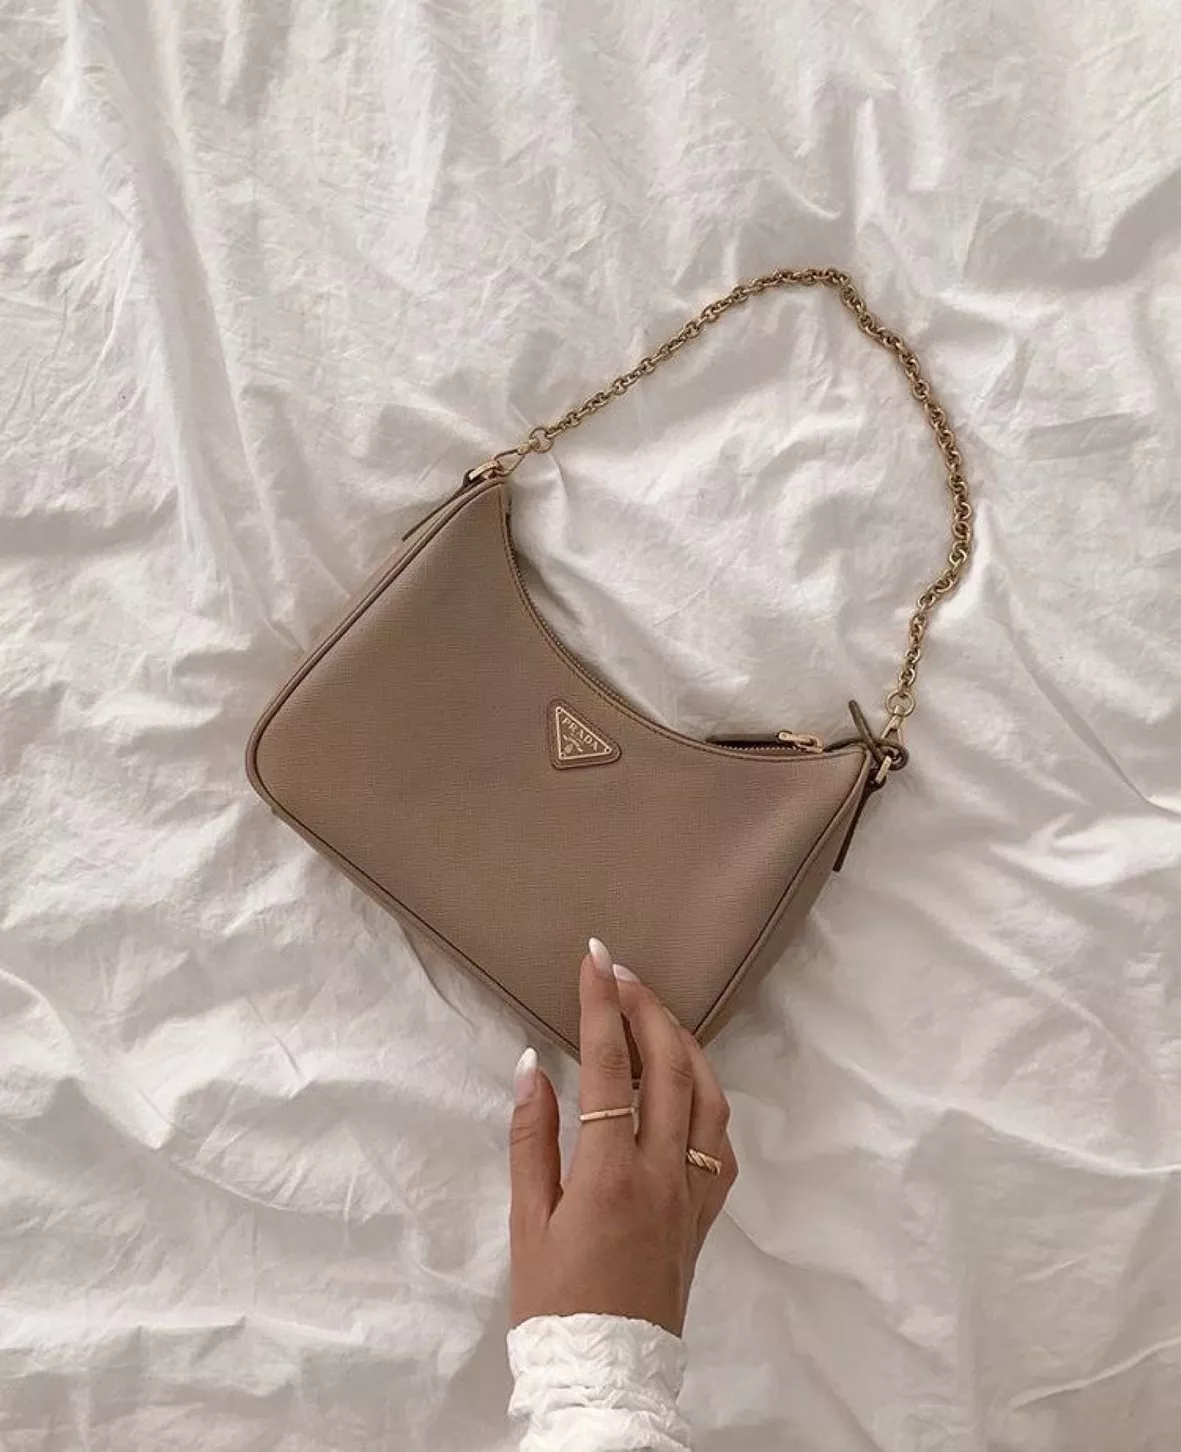 W2C DIOR messenger bag like the one on the picture below? : r/DHgate